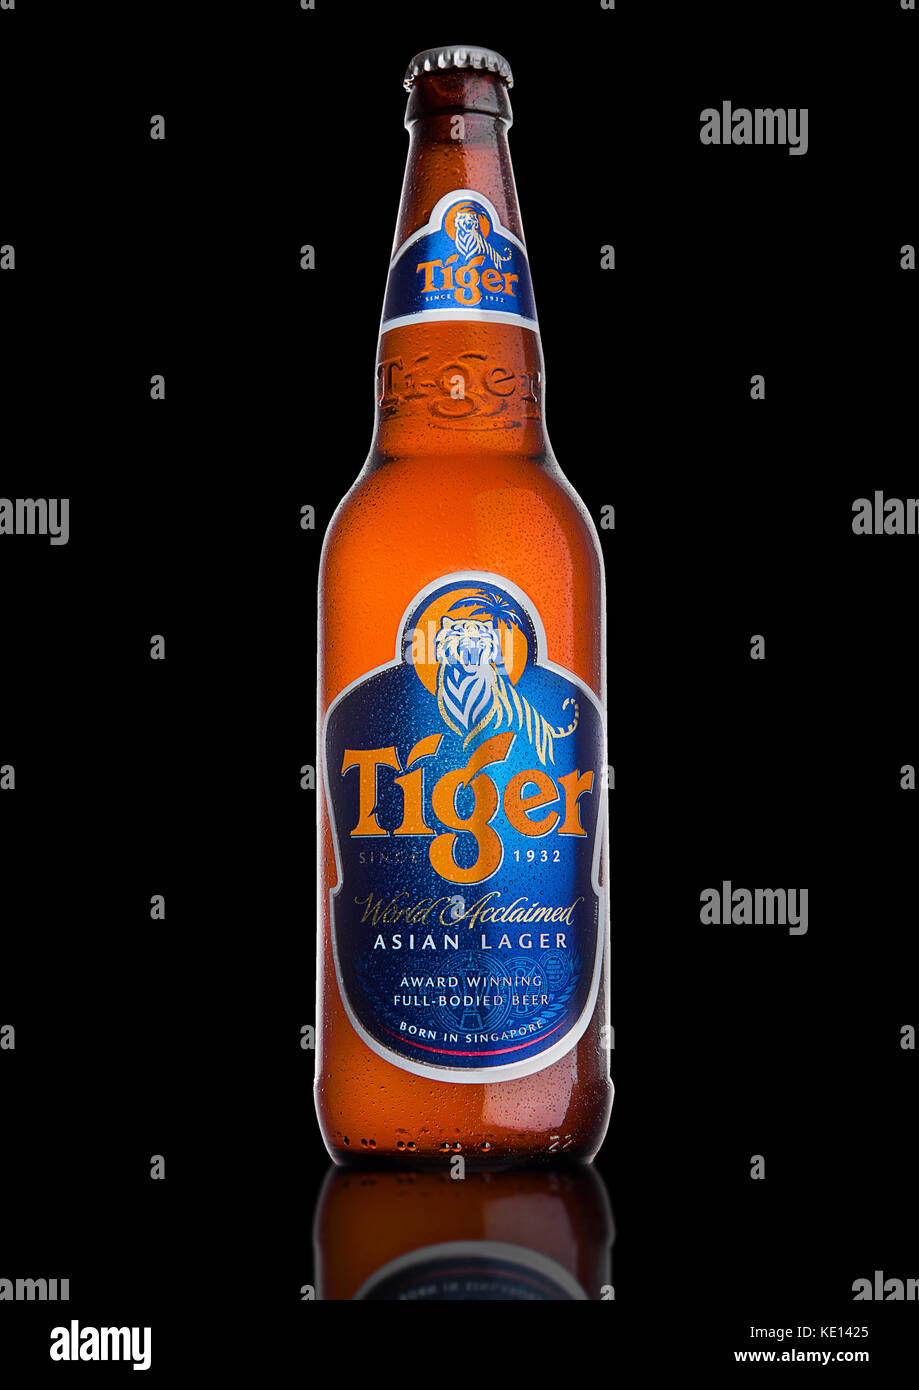 LONDON, UK, DECEMBER 15, 2016: Bottle of Tiger Beer on black background, First launched in 1932 is Singapore's first brewed beer. Stock Photo